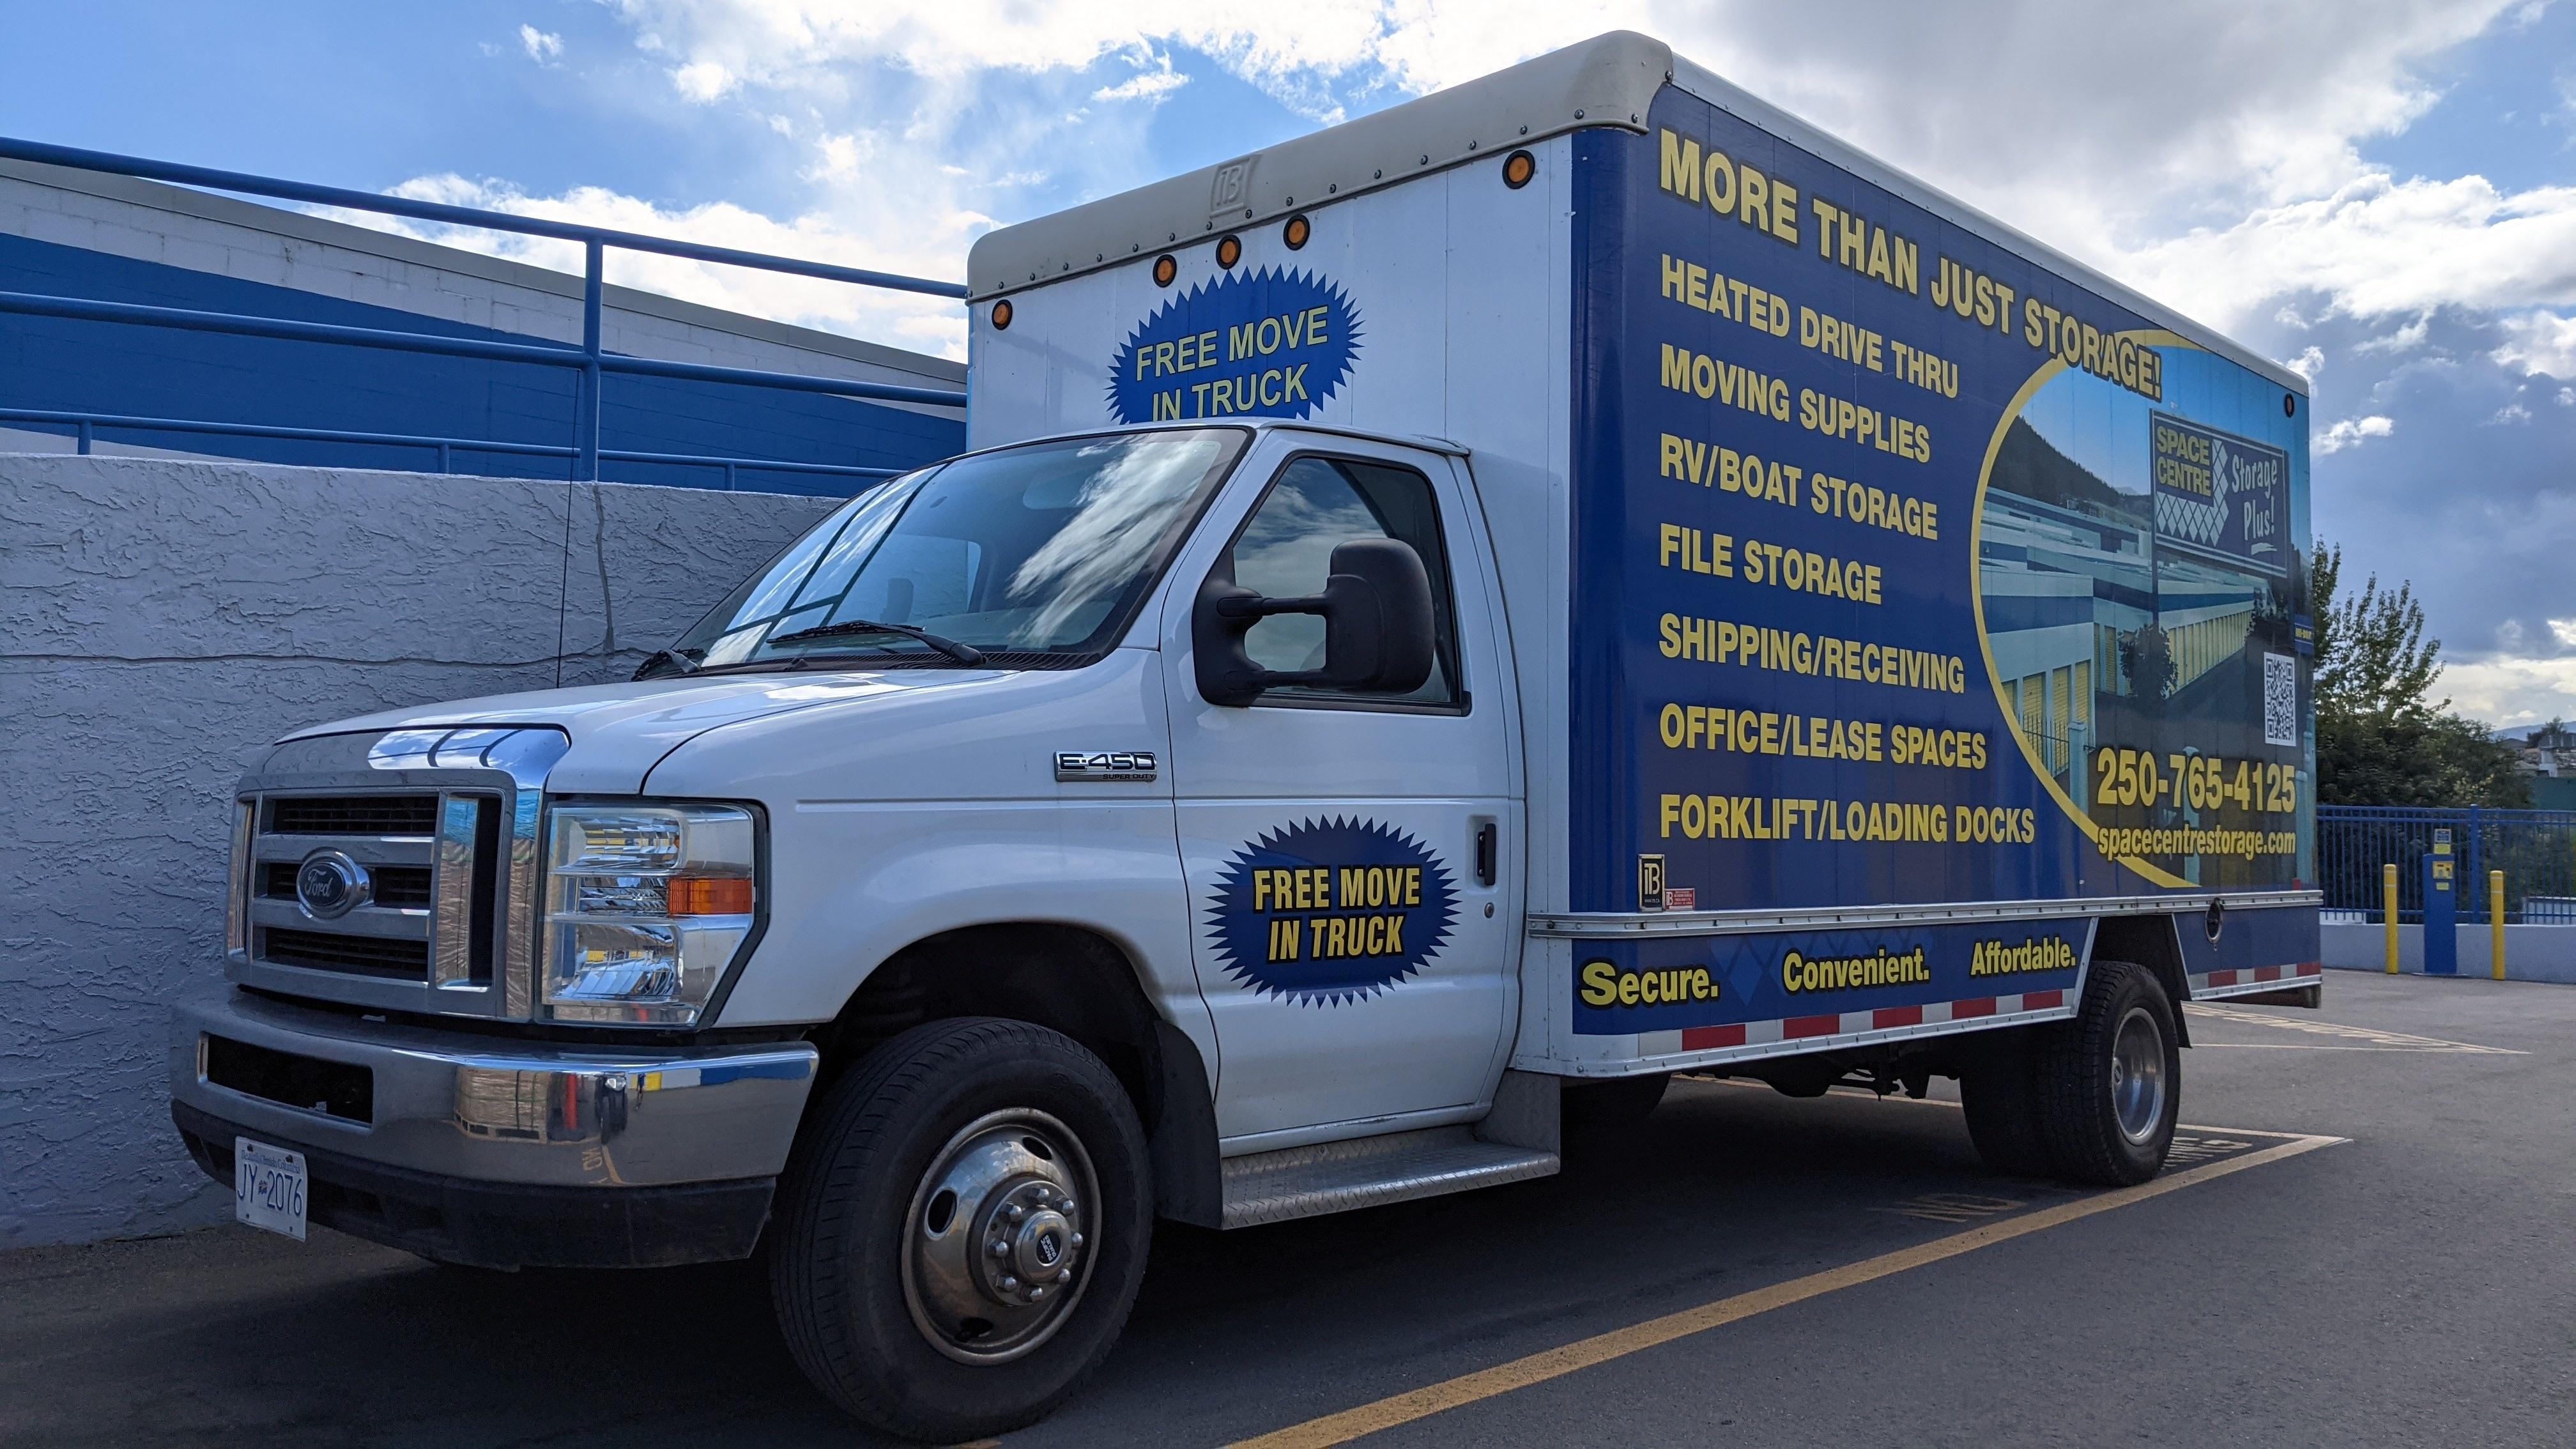 Did you know that Space Centre Storage offers a free moving truck within Kelowna?